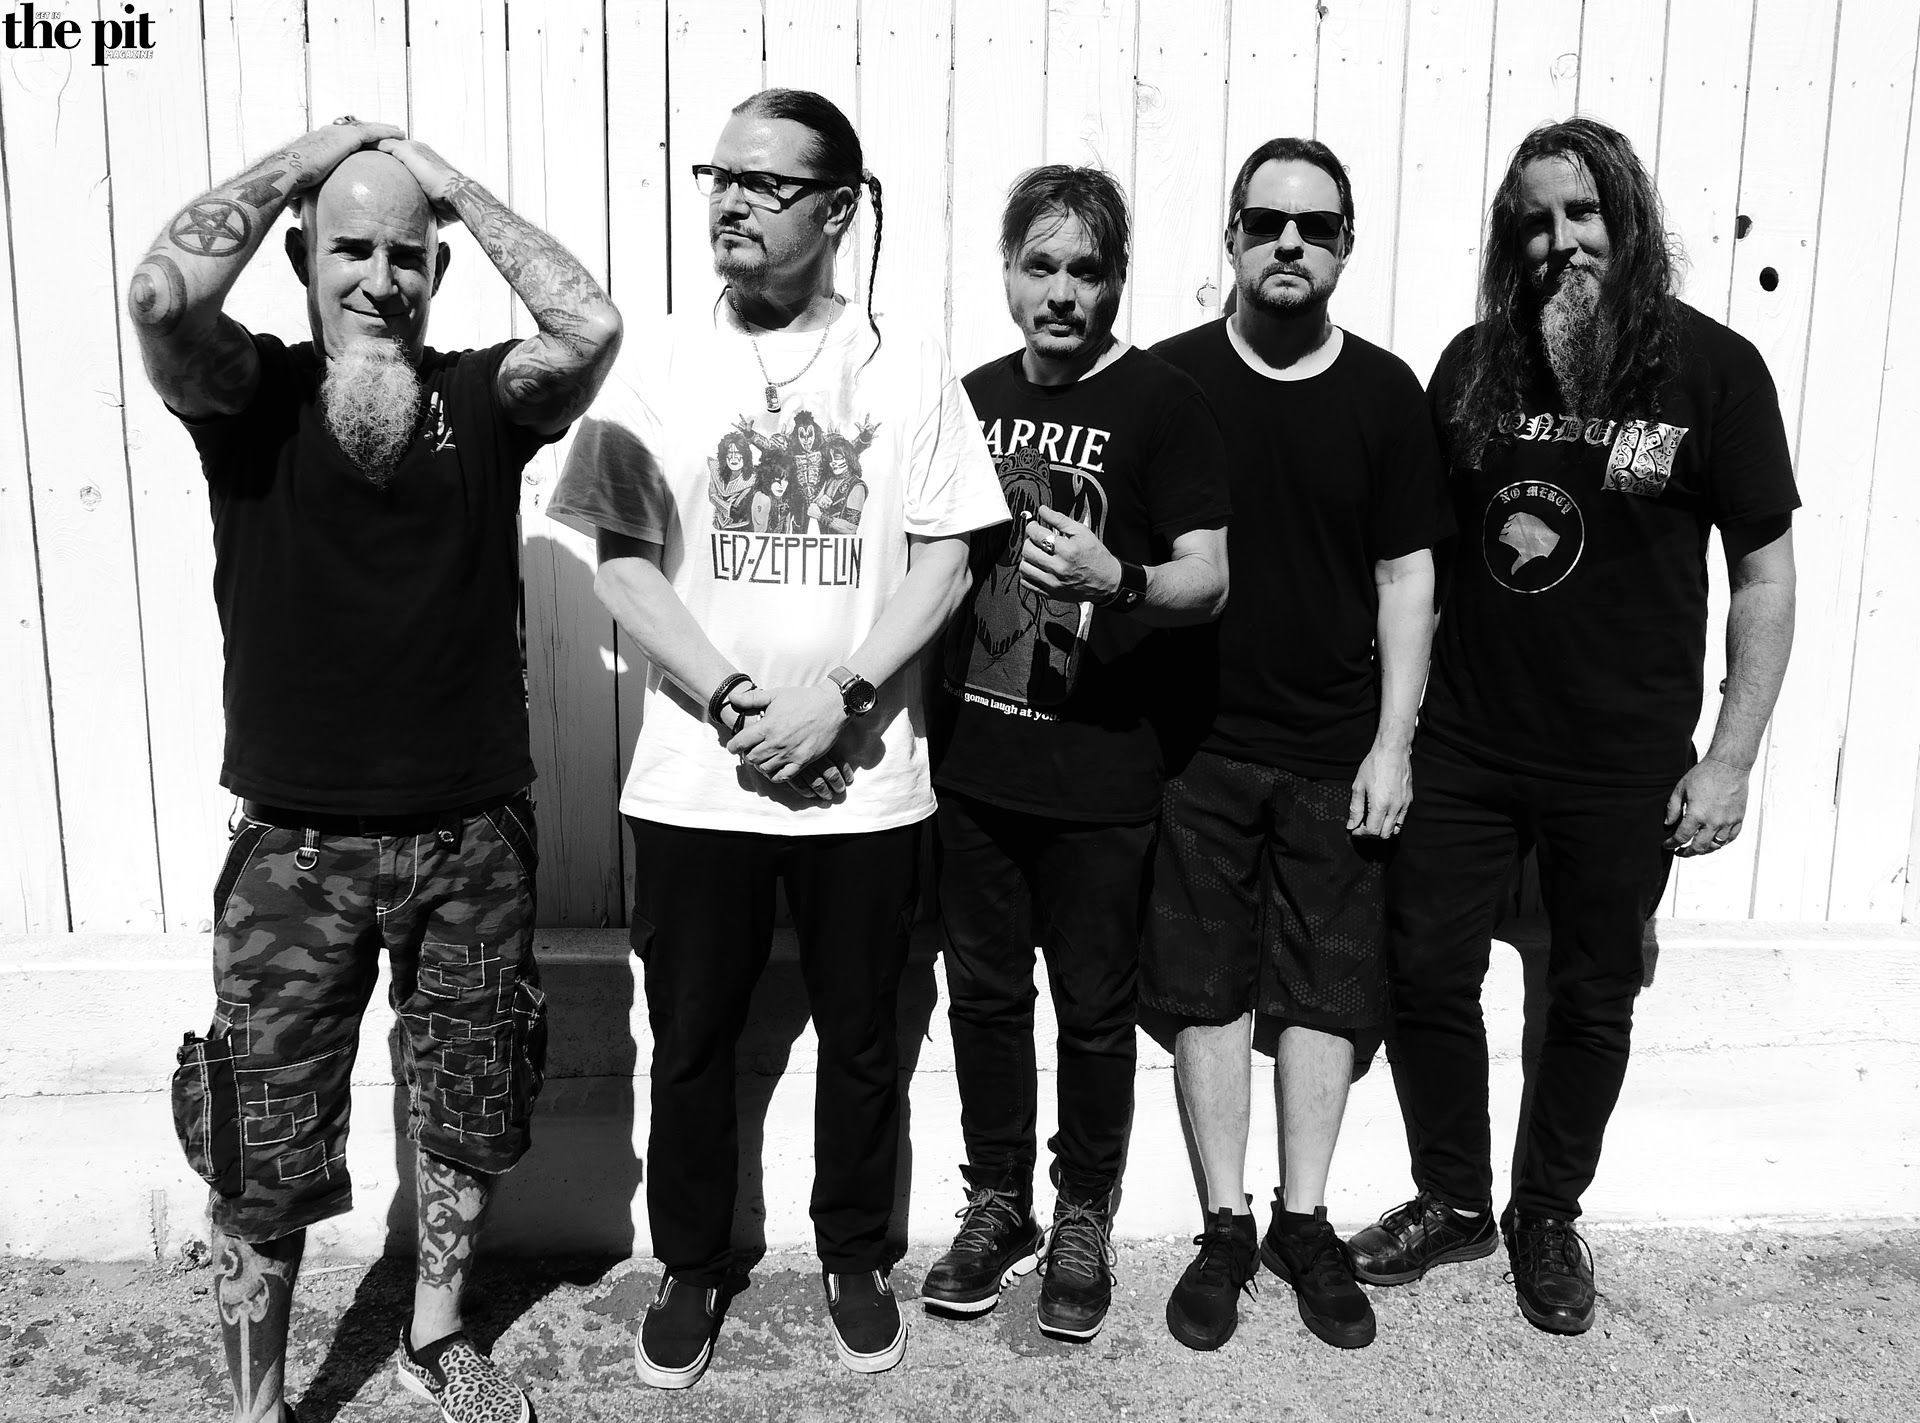 Five men standing in a line against a wooden wall, dressed in casual black clothing with visible Mr. Bungle t-shirts, posing for the camera.